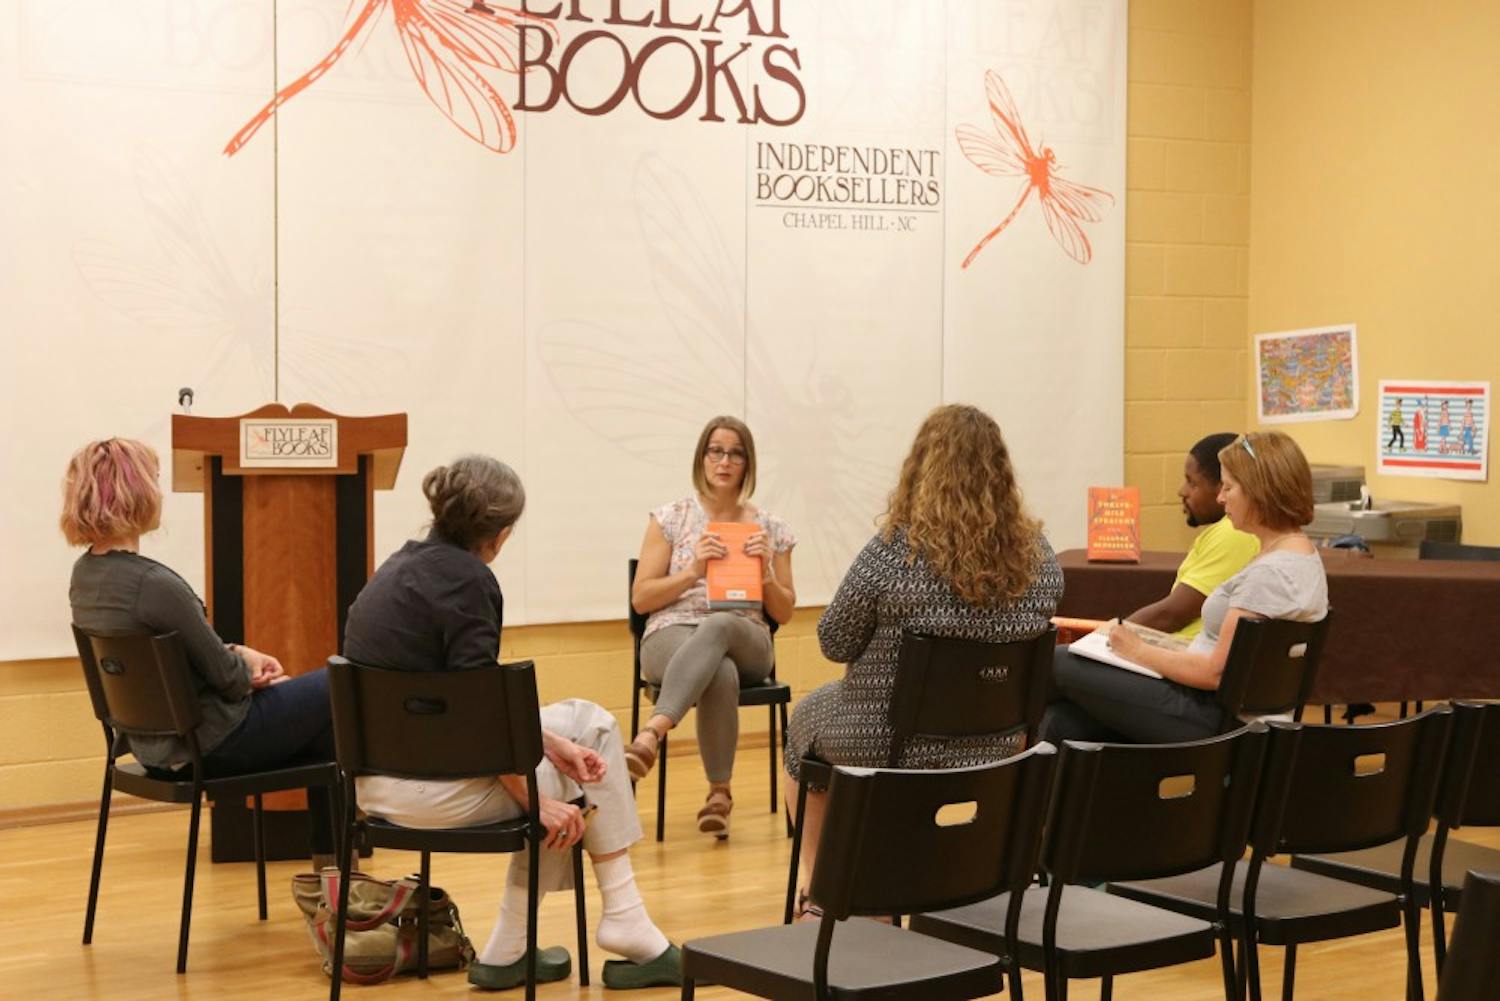 Eleanor Henderson sits with five others hosting a Q&amp;A on Wednesday night at Flyleaf books.&nbsp;